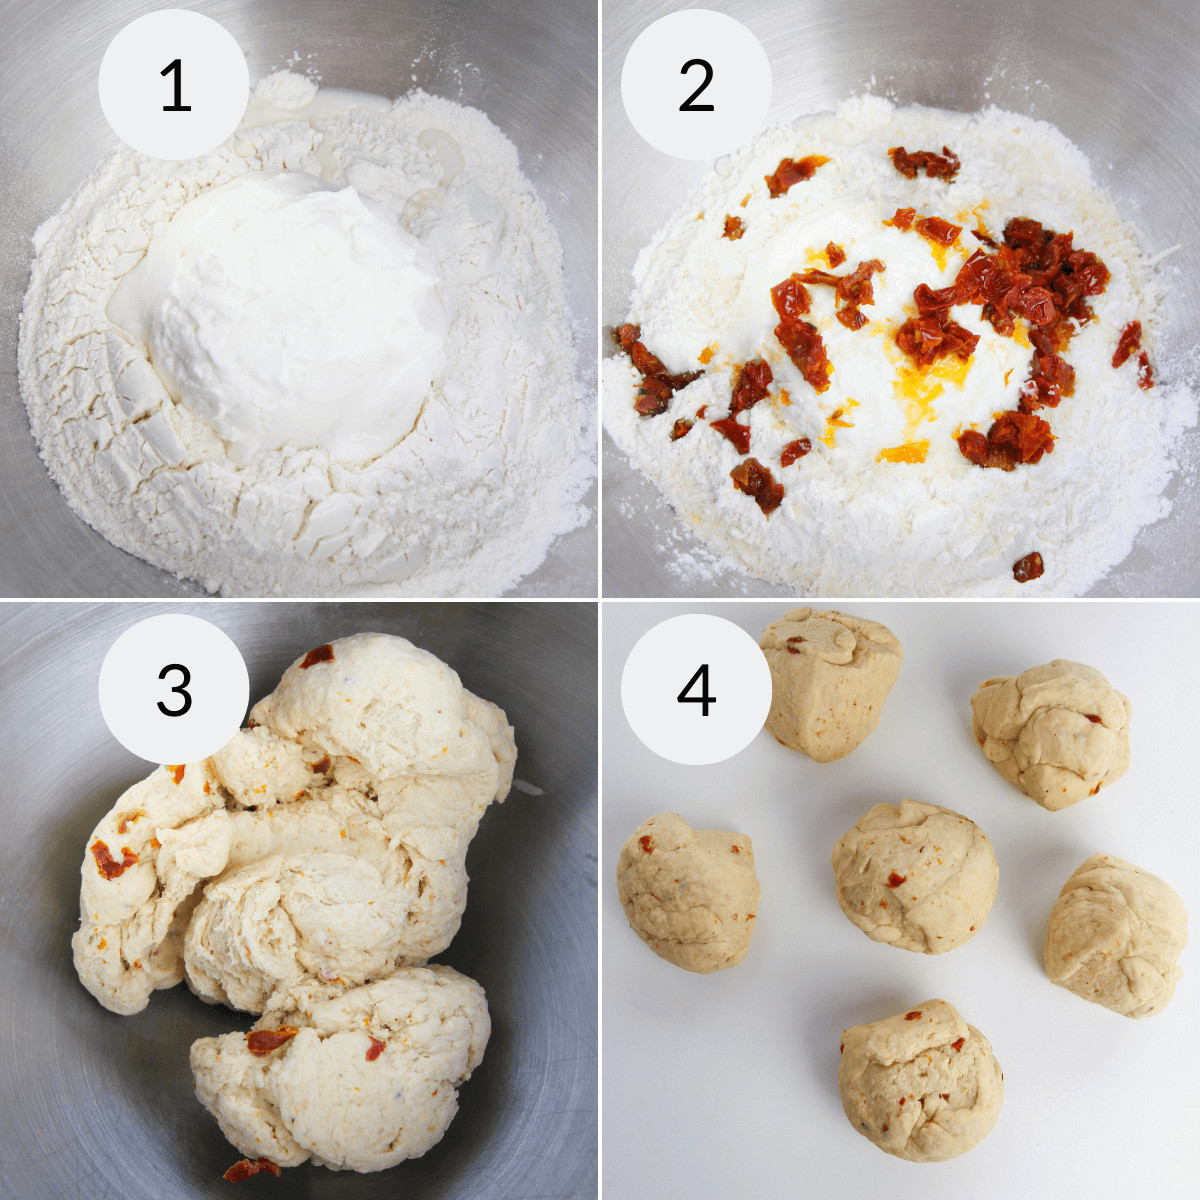 Step by step instructions for creating dough for the bagels by mixing the dry and wet ingredients together.